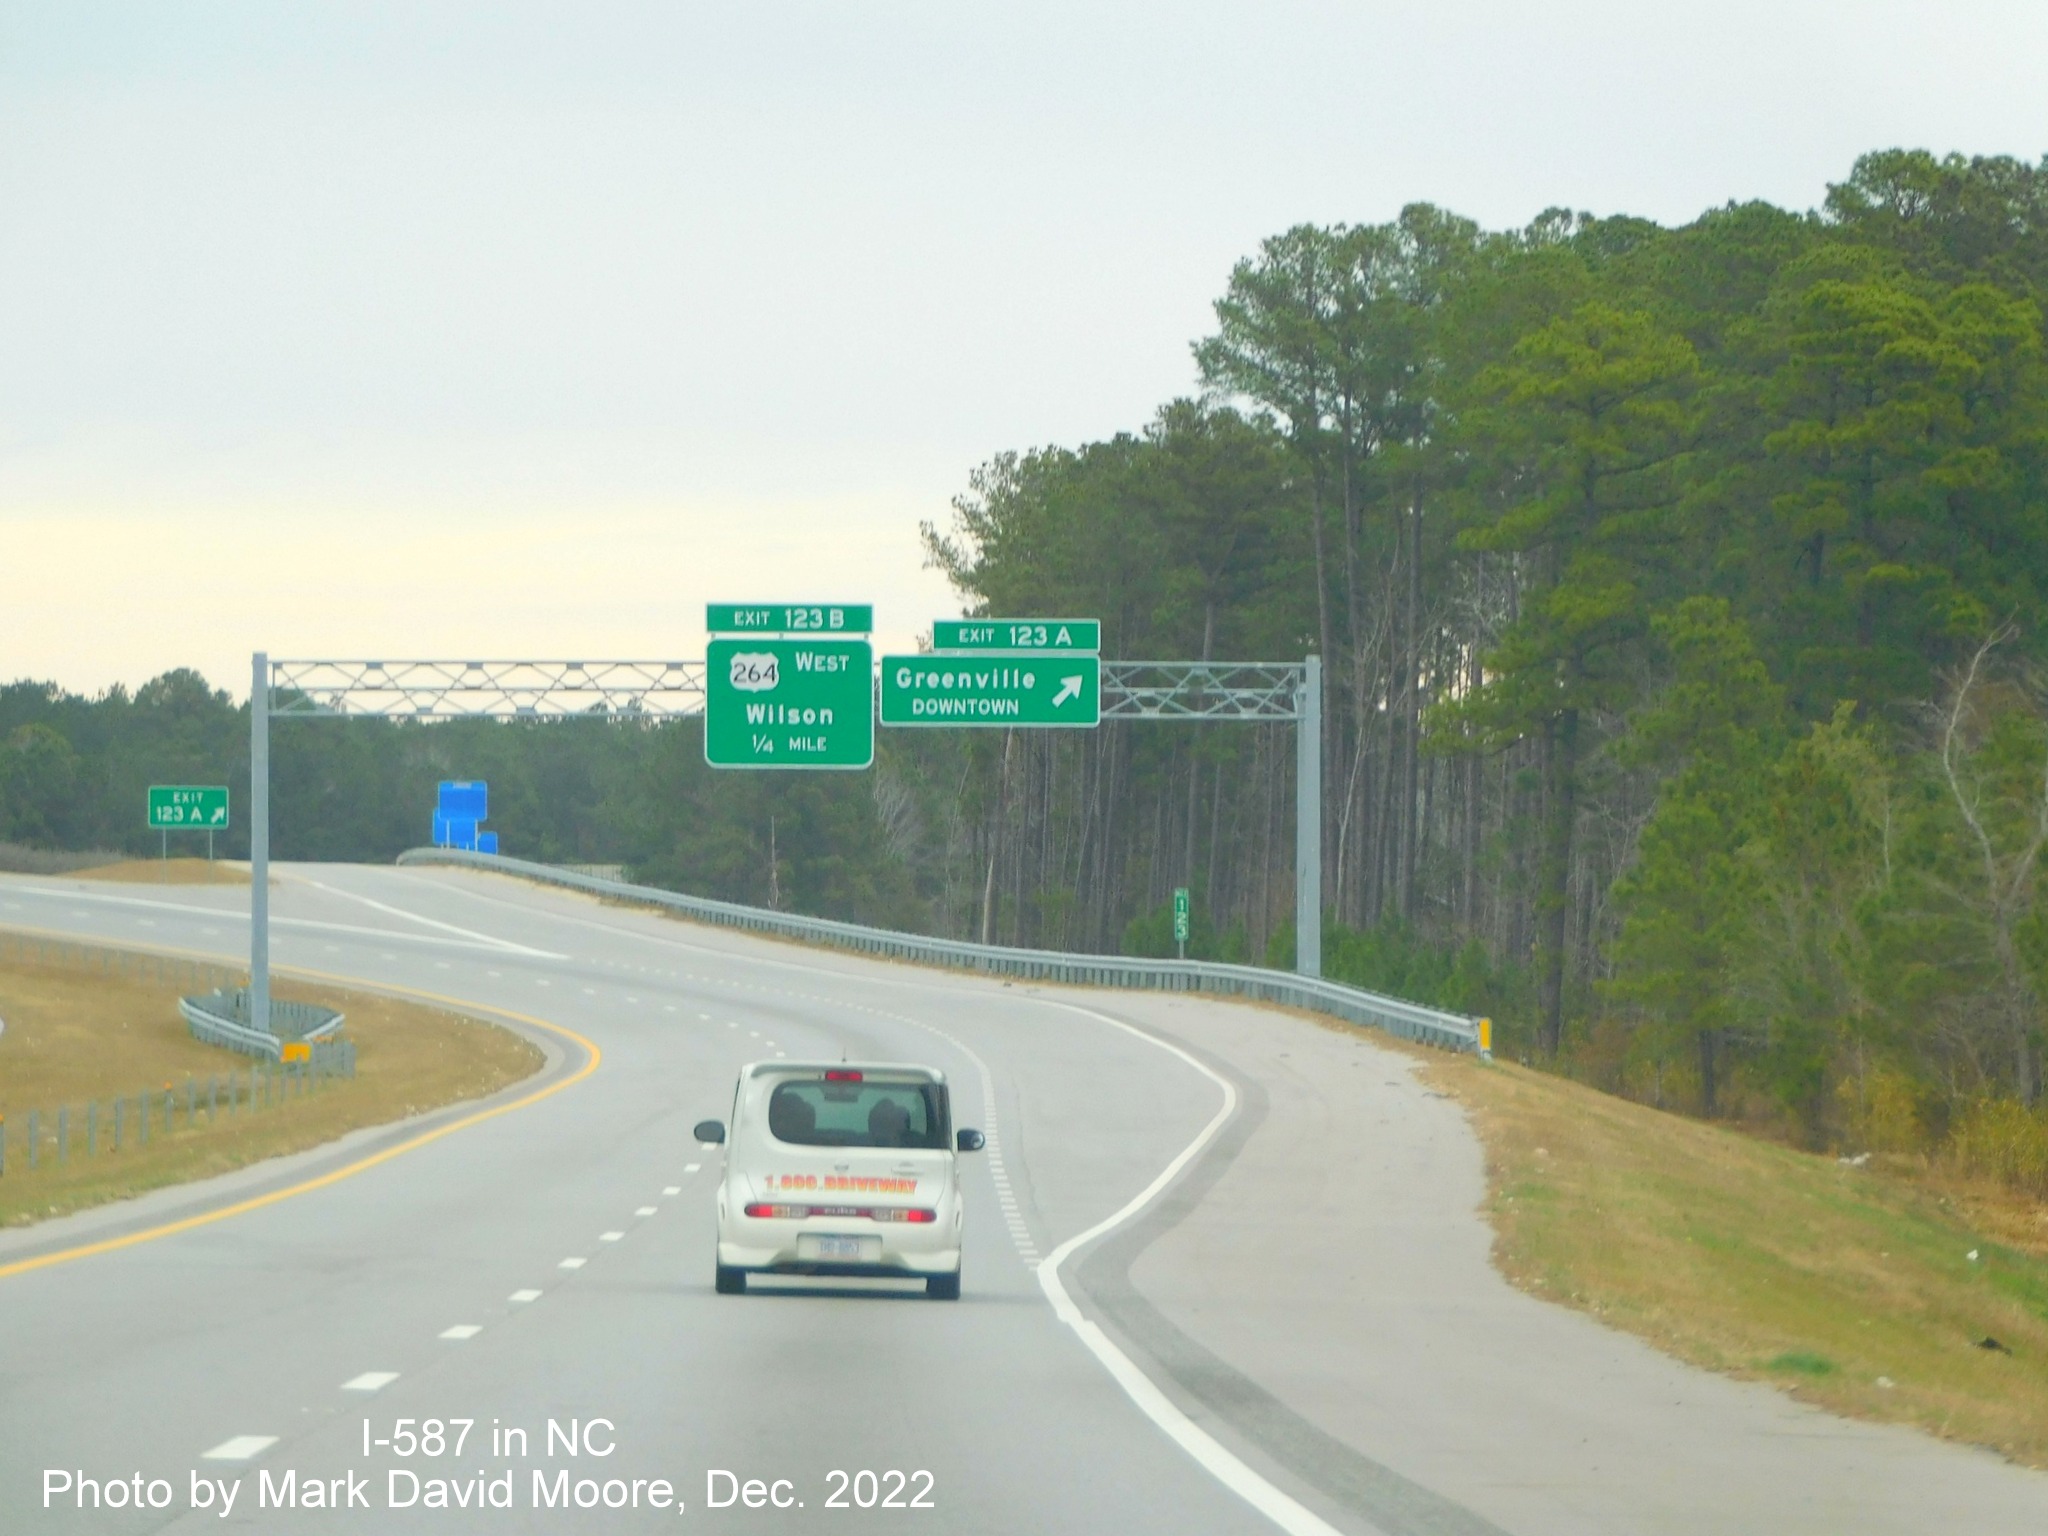 Image of overhead advance signage approaching Downtown Greenville and I-587 West exits on US 264 West/NC 11 Bypass North in Greenville, photo by Mark David Moore, December 2022